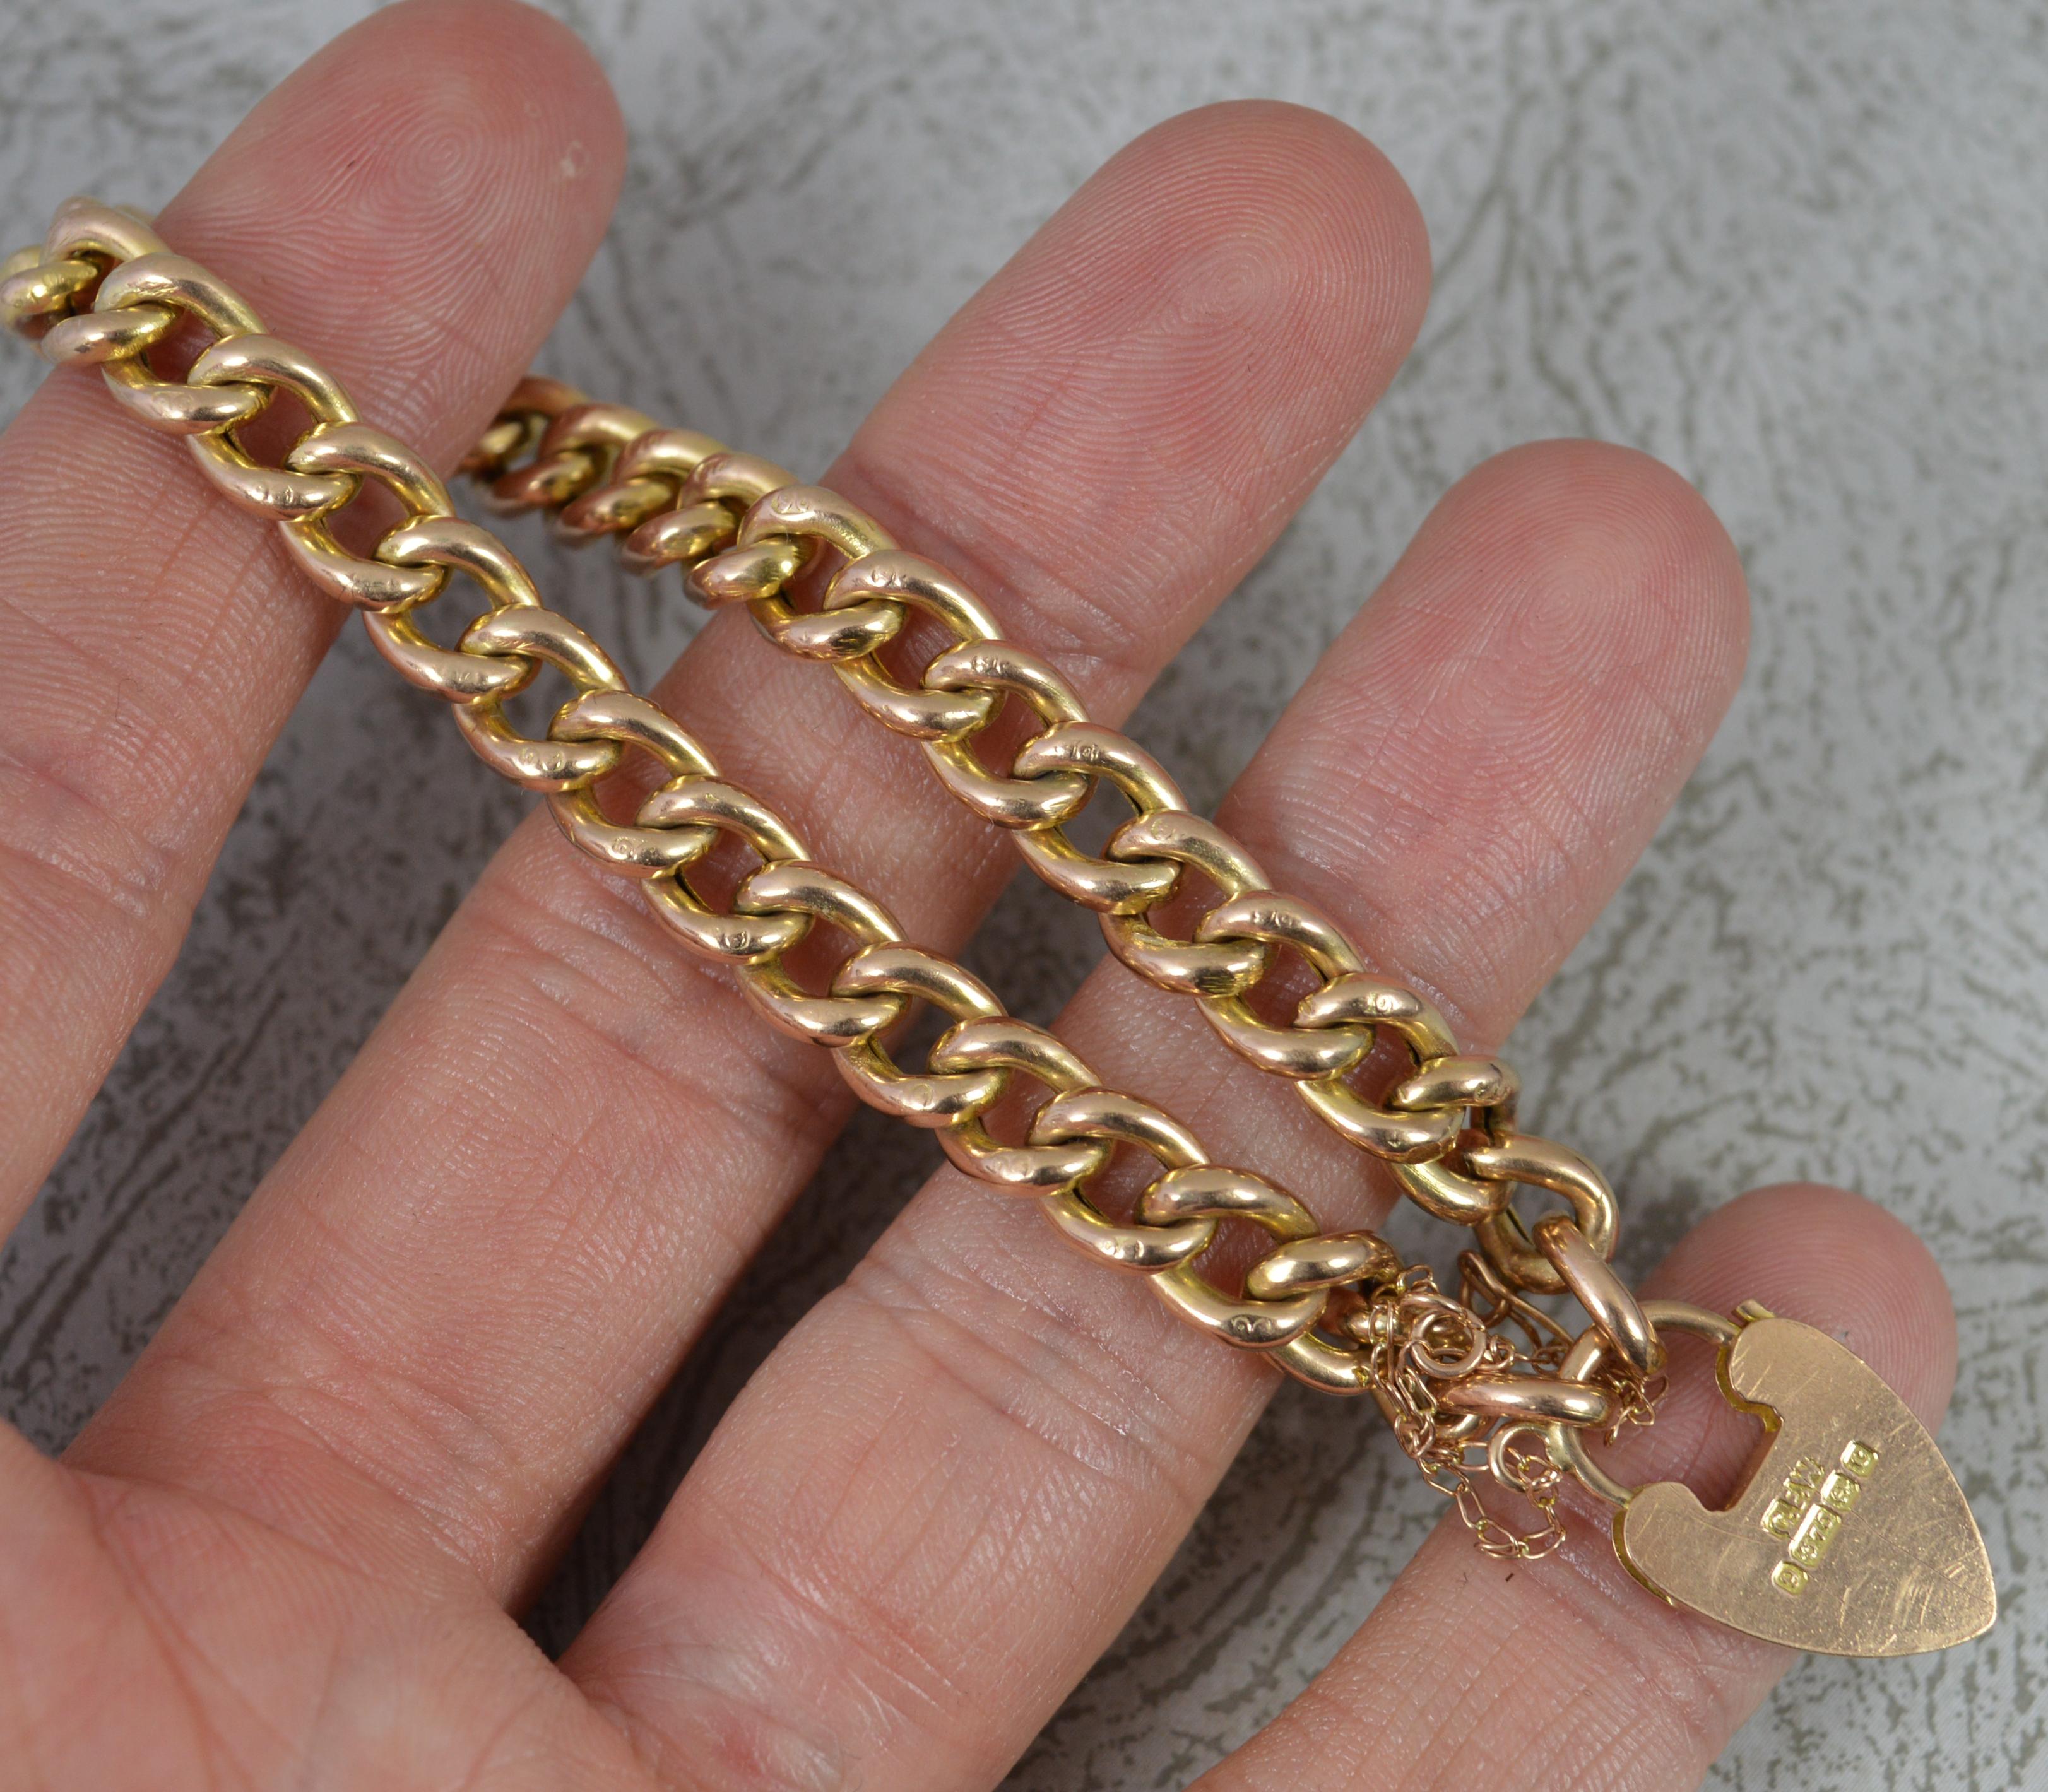 A superb Edwardian era bracelet..
Solid 9 carat gold example.
Well made, plain, polished curb links with 9c to each link. Complete with a working padlock clasp and safety chain.

CONDITION ; Very good for age. Working clasp. Crisp design and links.